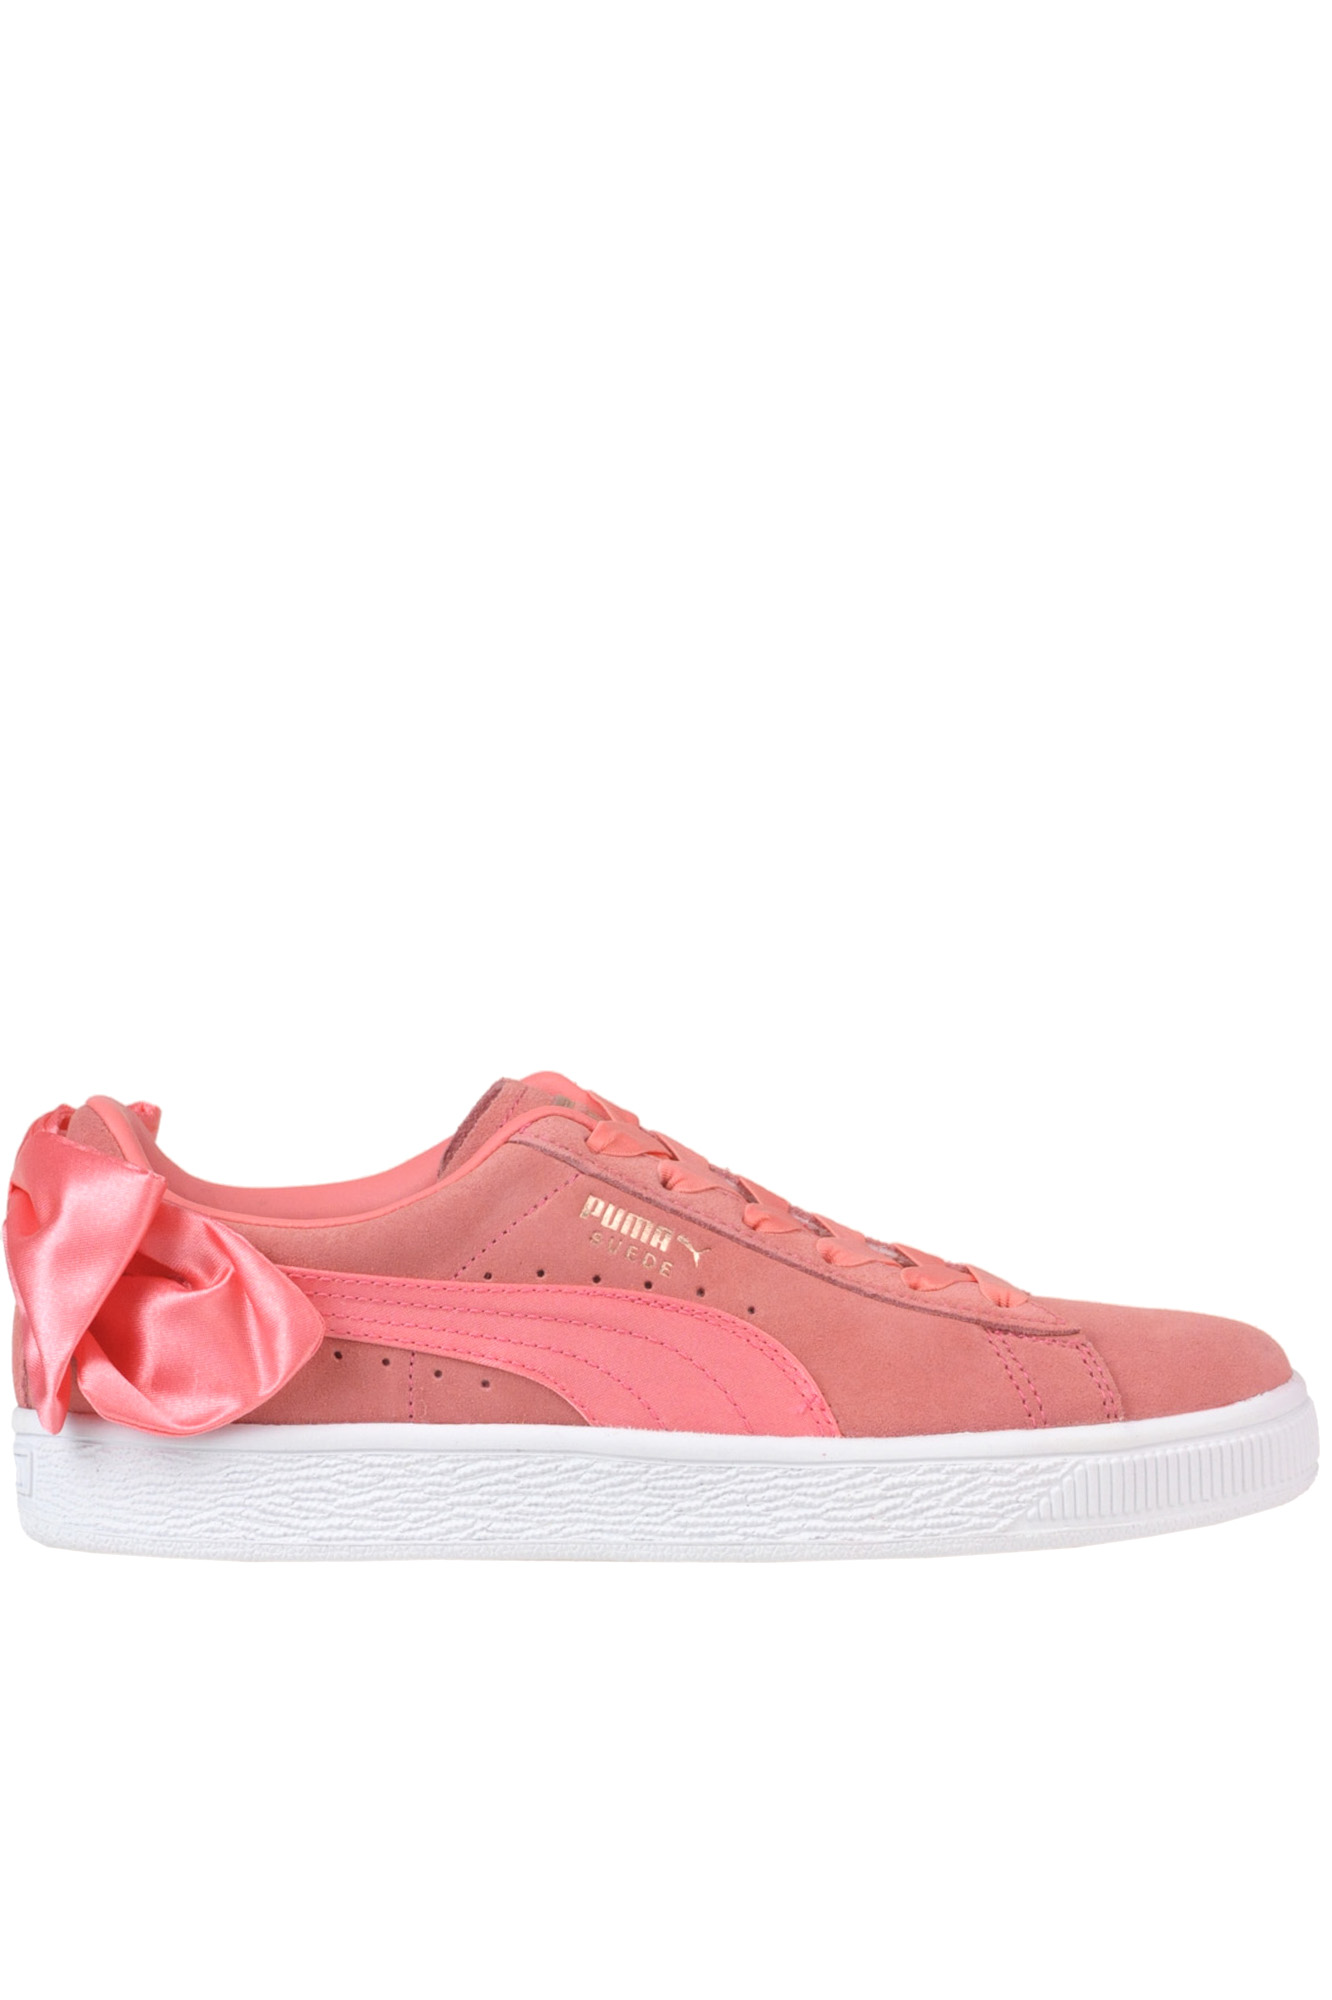 PUMA 'BOW' SUEDE SNEAKERS